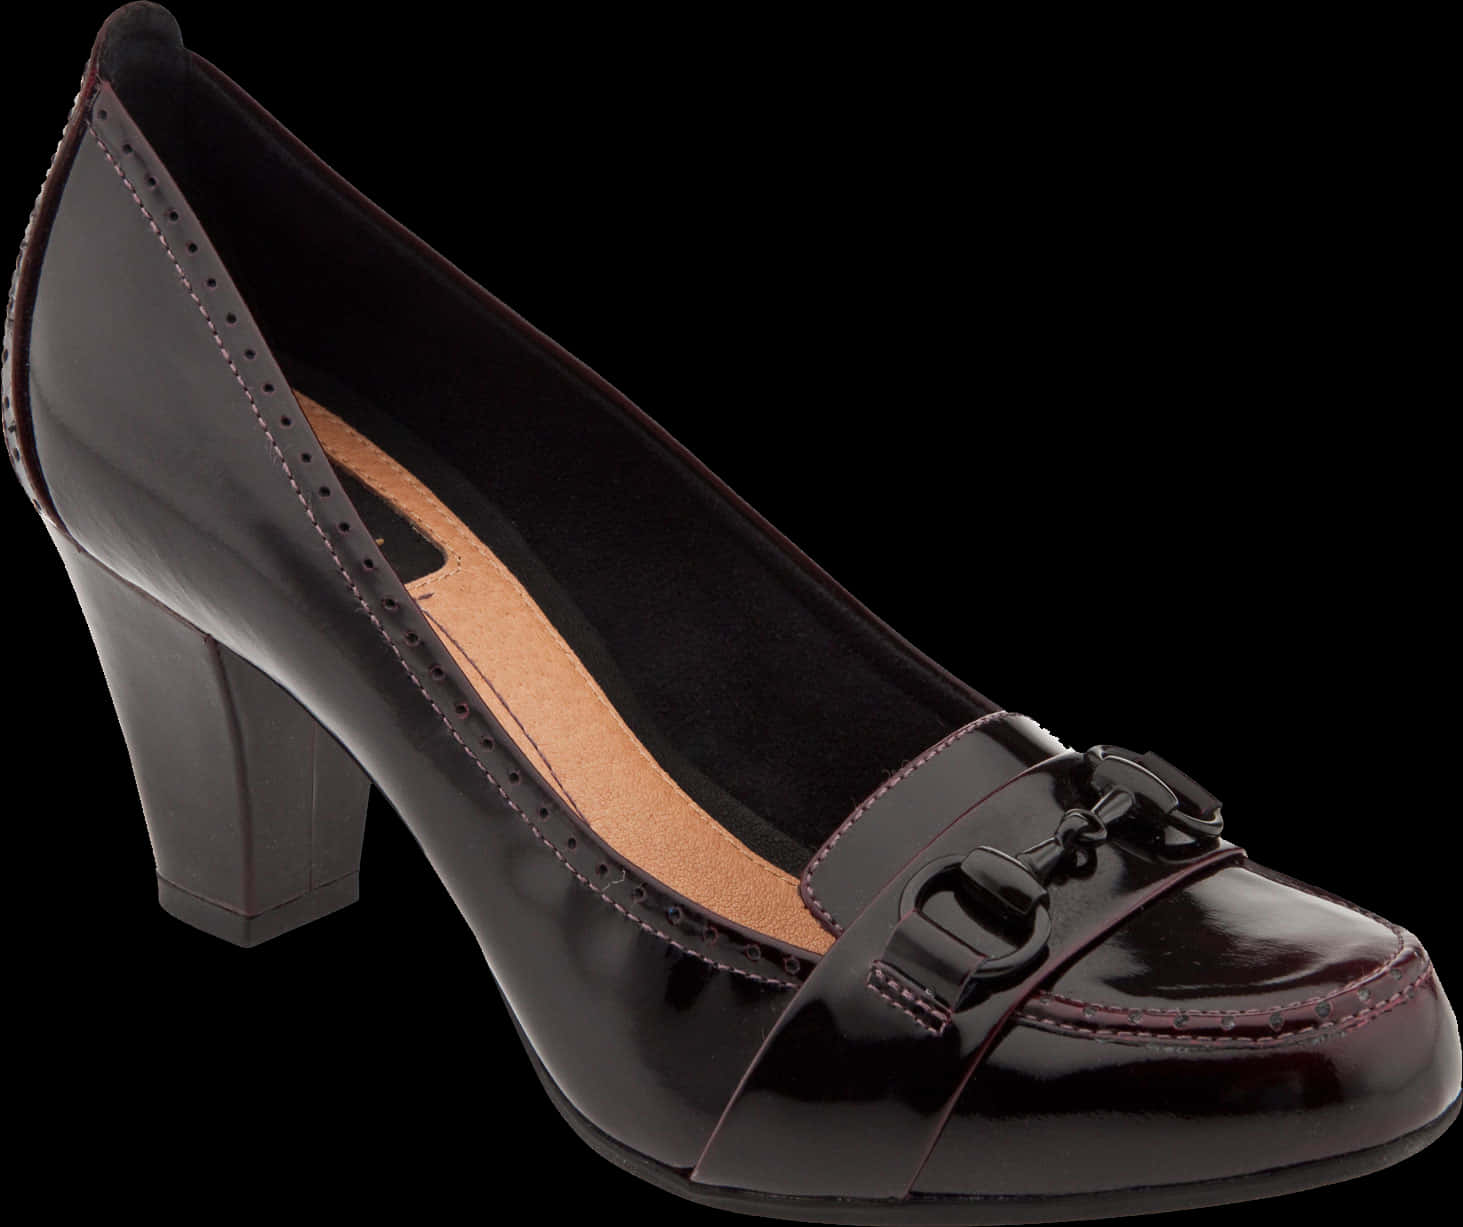 Black Patent Leather Heeled Loafer